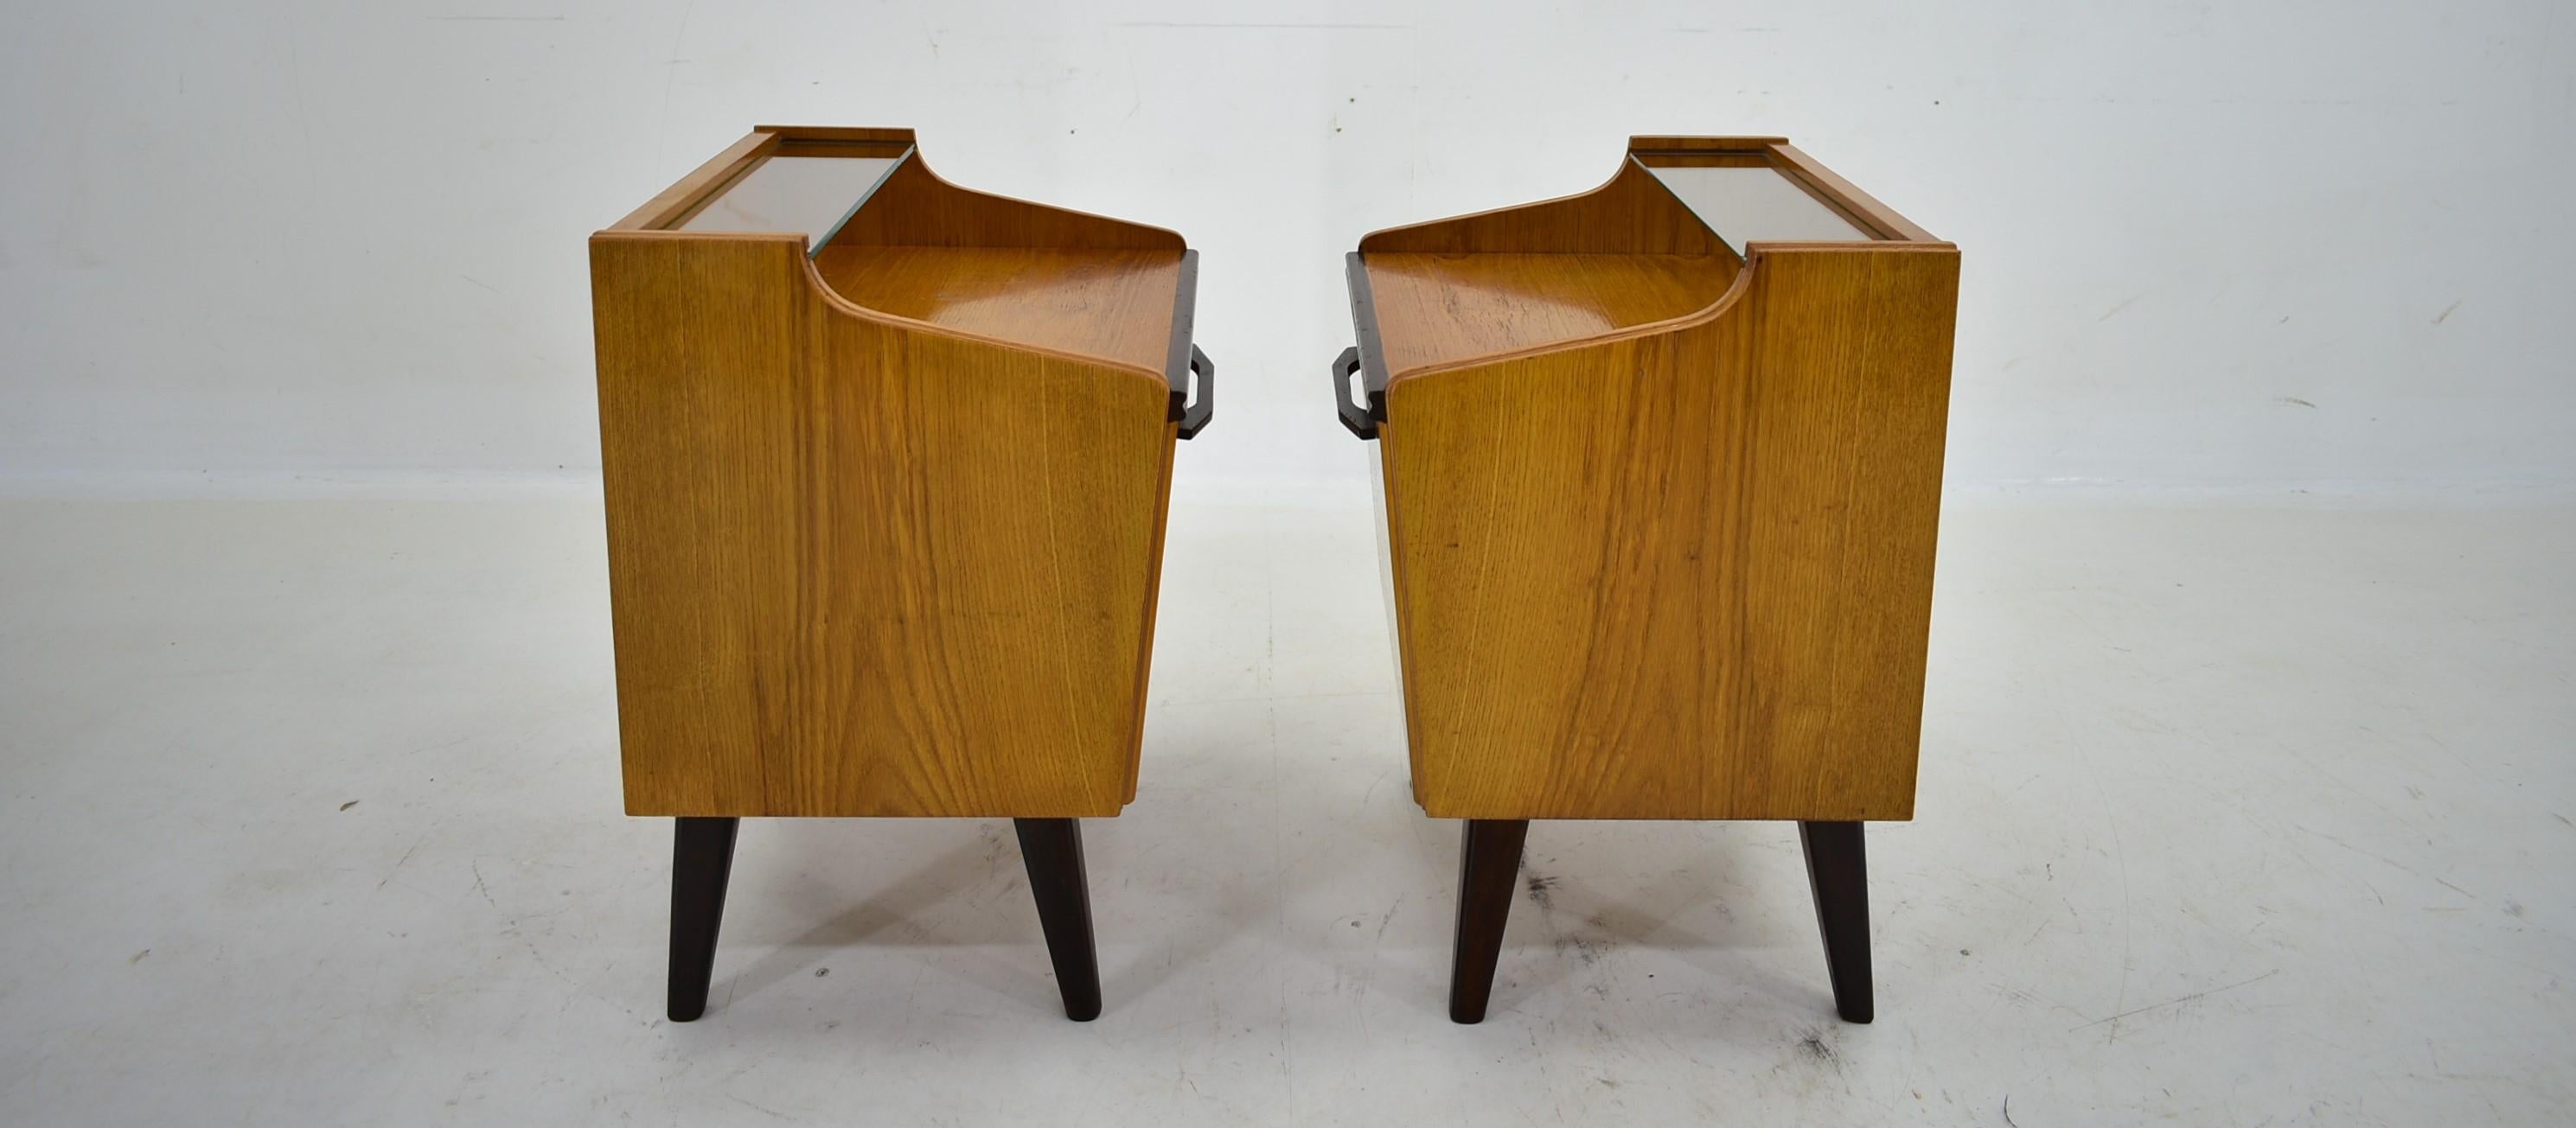 1960s Pair of Midcentury Bedside Tables by Mojmir Požár, Czechoslovakia For Sale 10